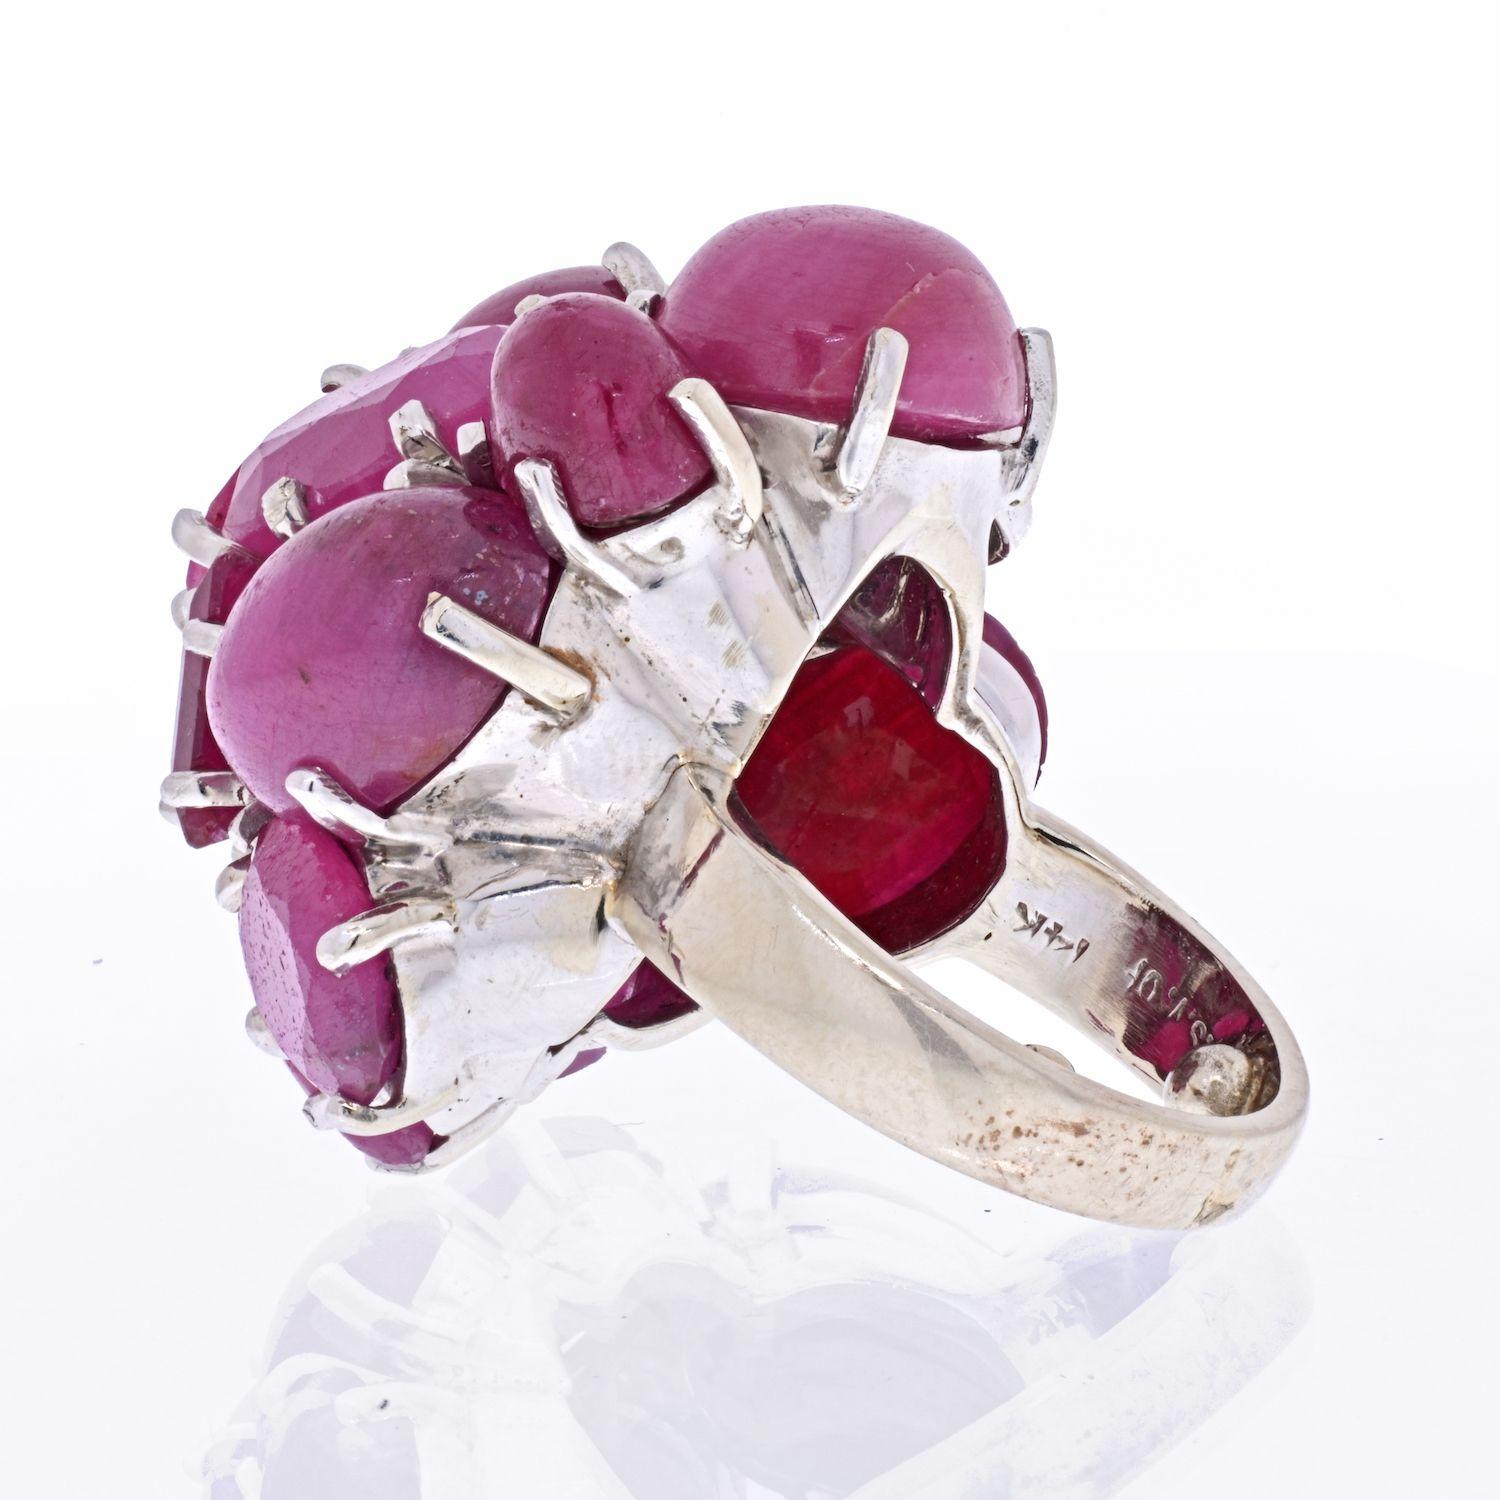 Modern Seaman Schepps 14K White Gold 1970's Cabochon Ruby and Diamond Ring For Sale